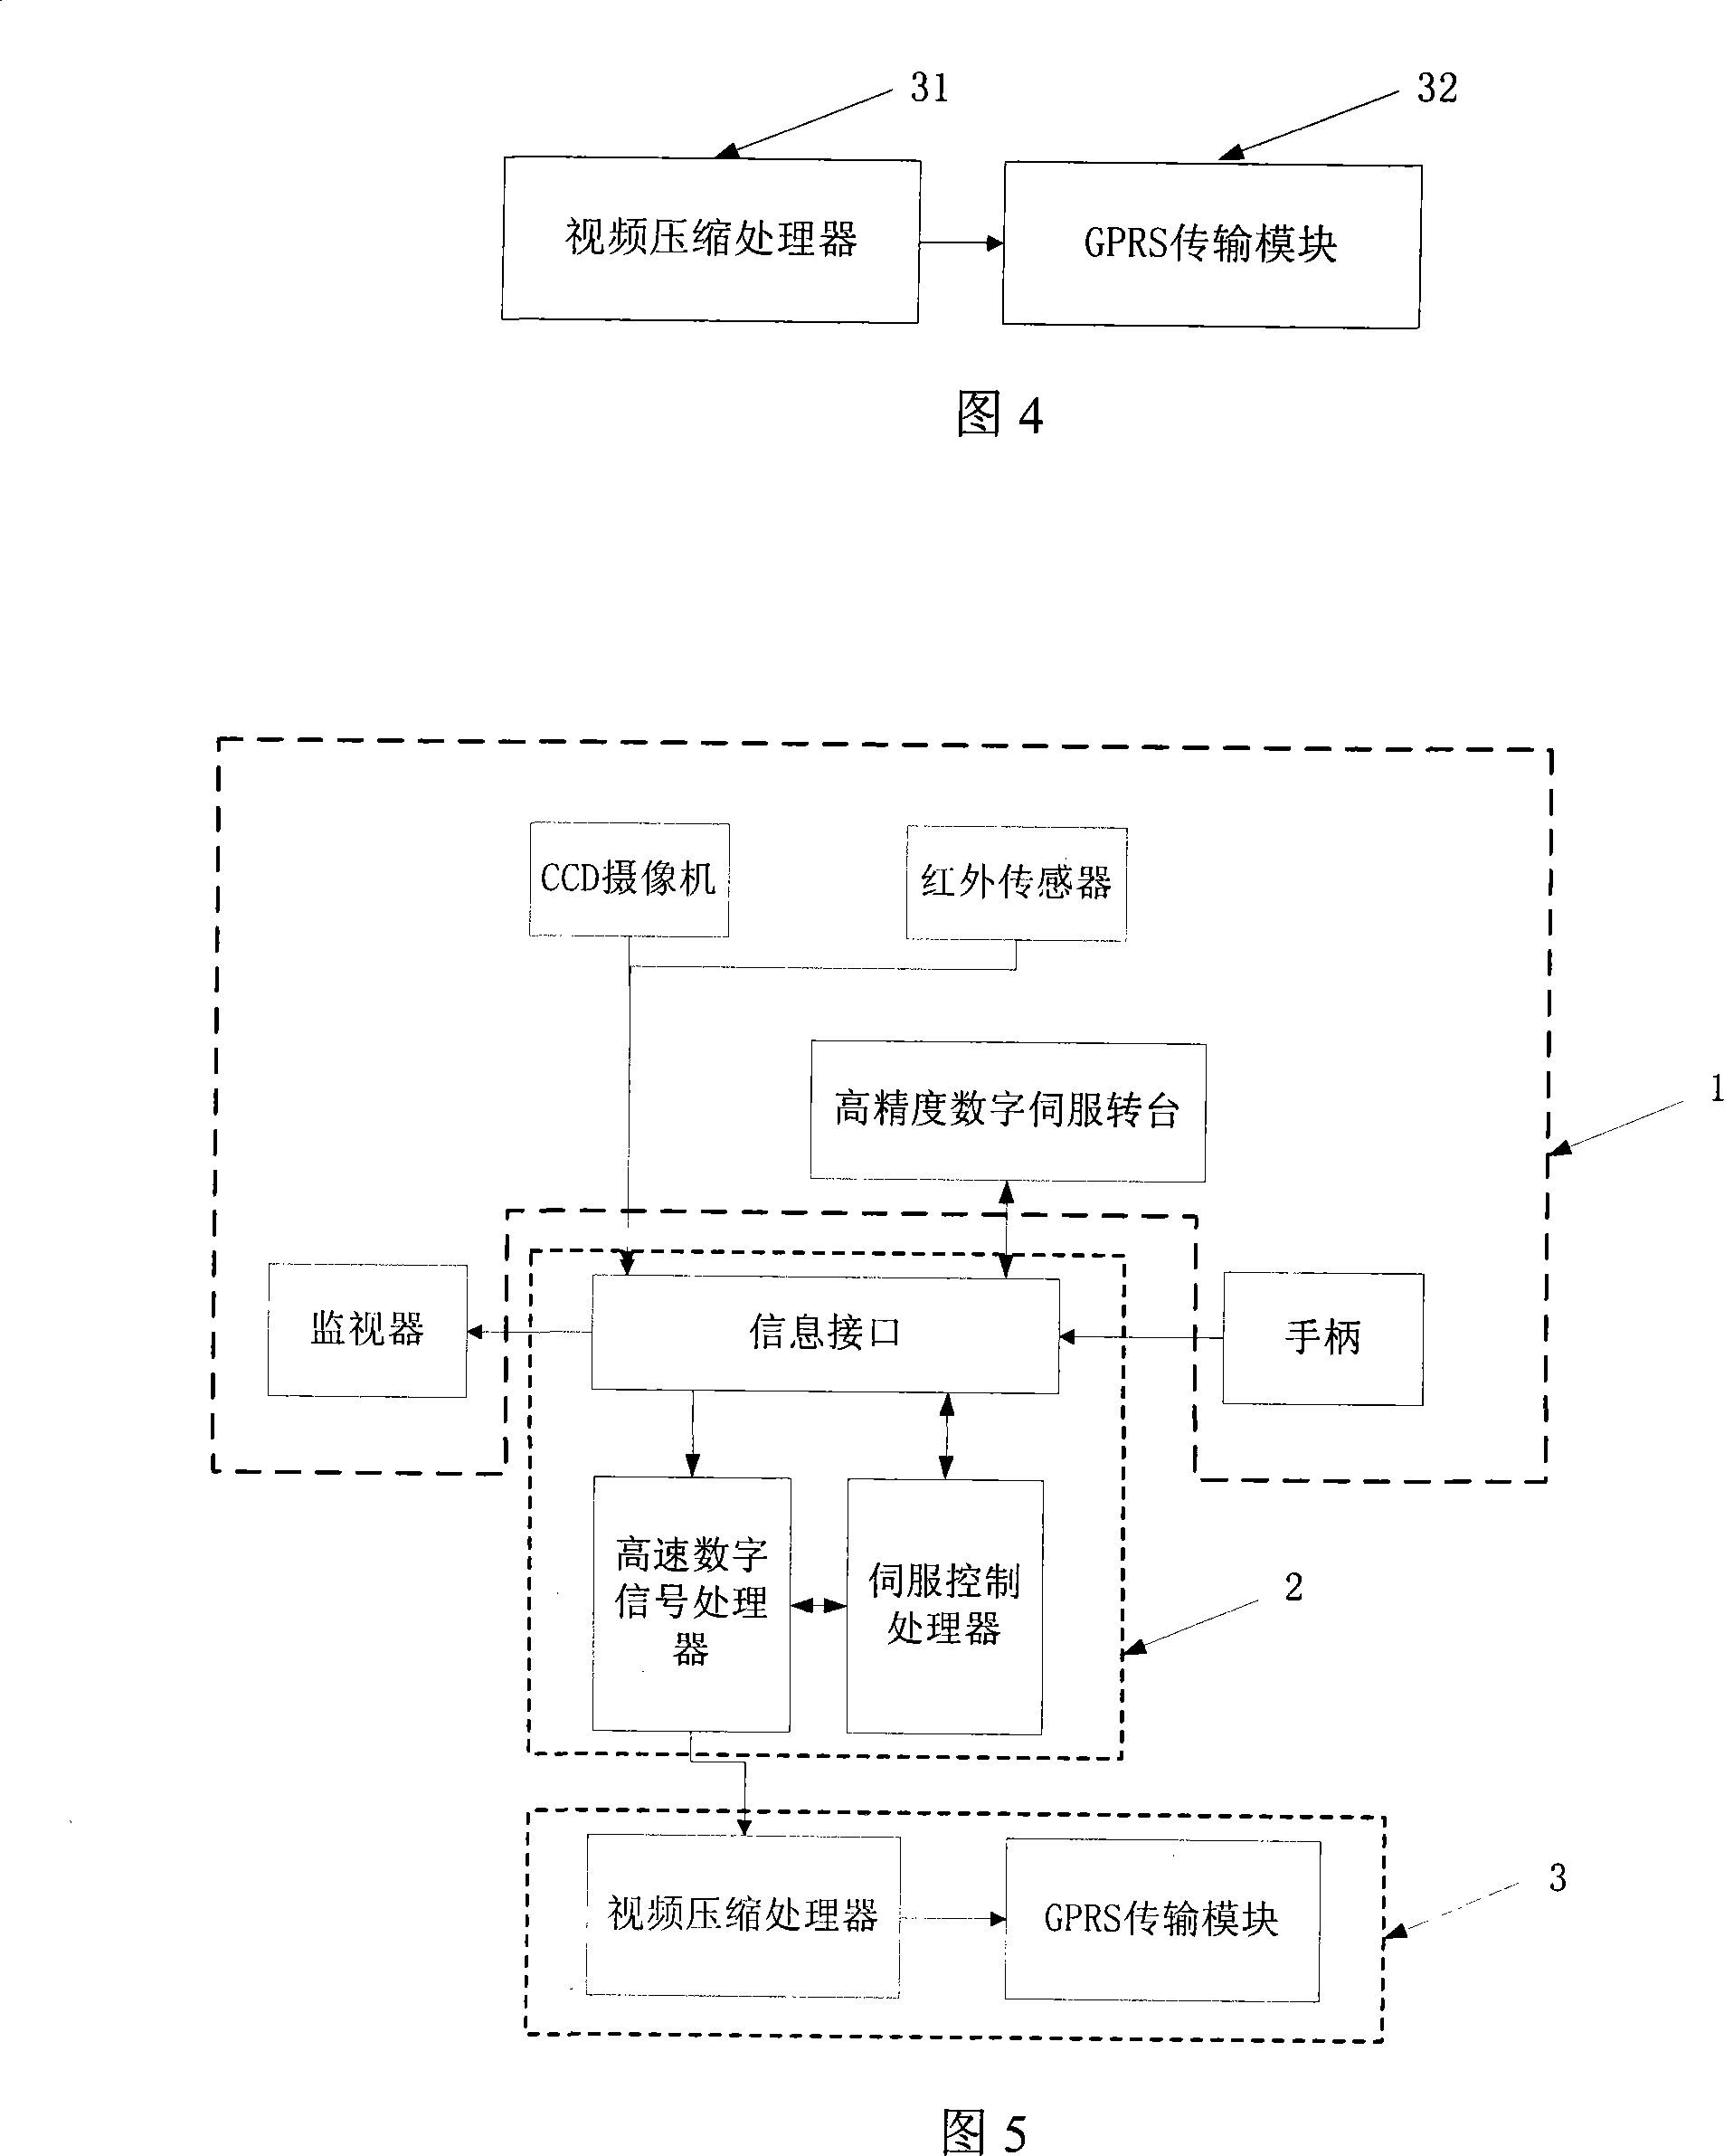 Multi-module and multi-target accurate tracking apparatus and method thereof